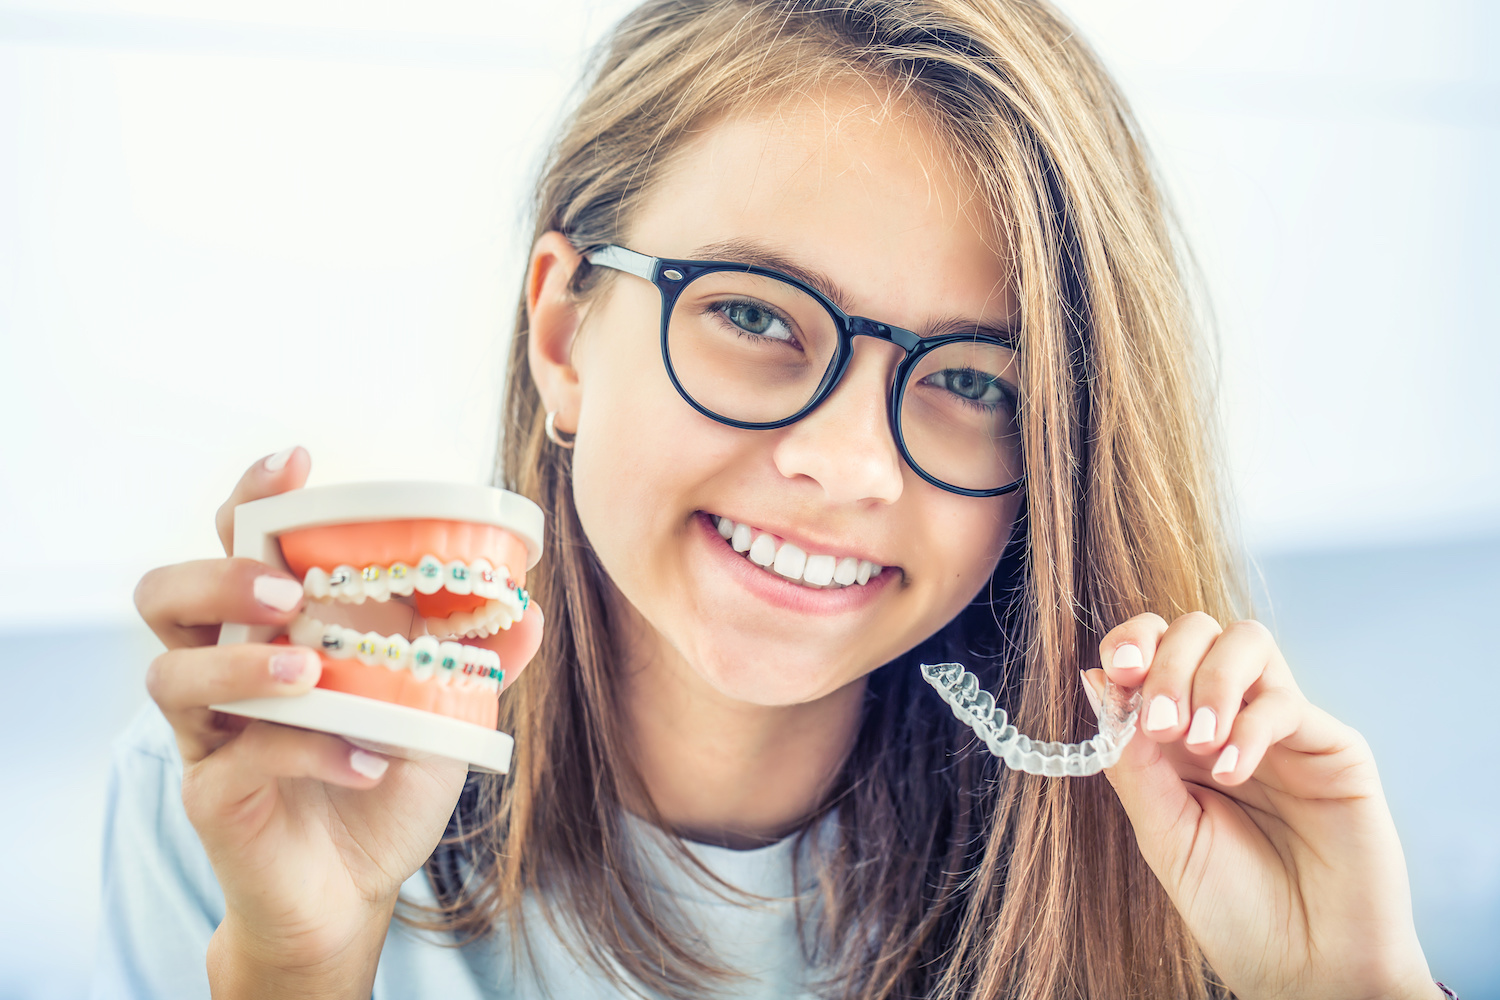 Dental invisible braces or silicone trainer in the hands of a young smiling girl. Orthodontic concept — Invisalign.